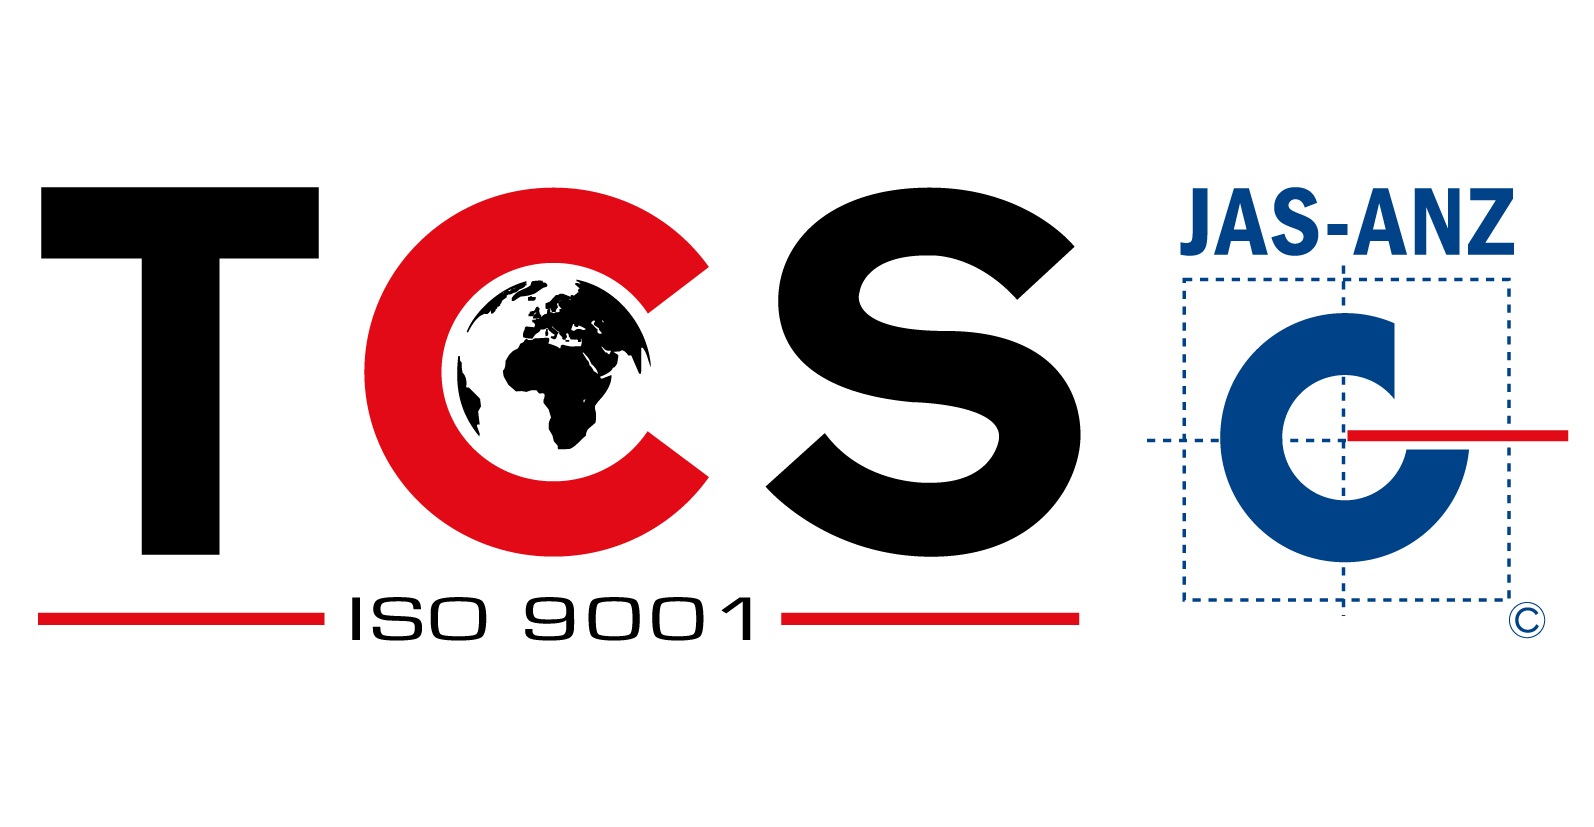 ISO 9001 jas-anz